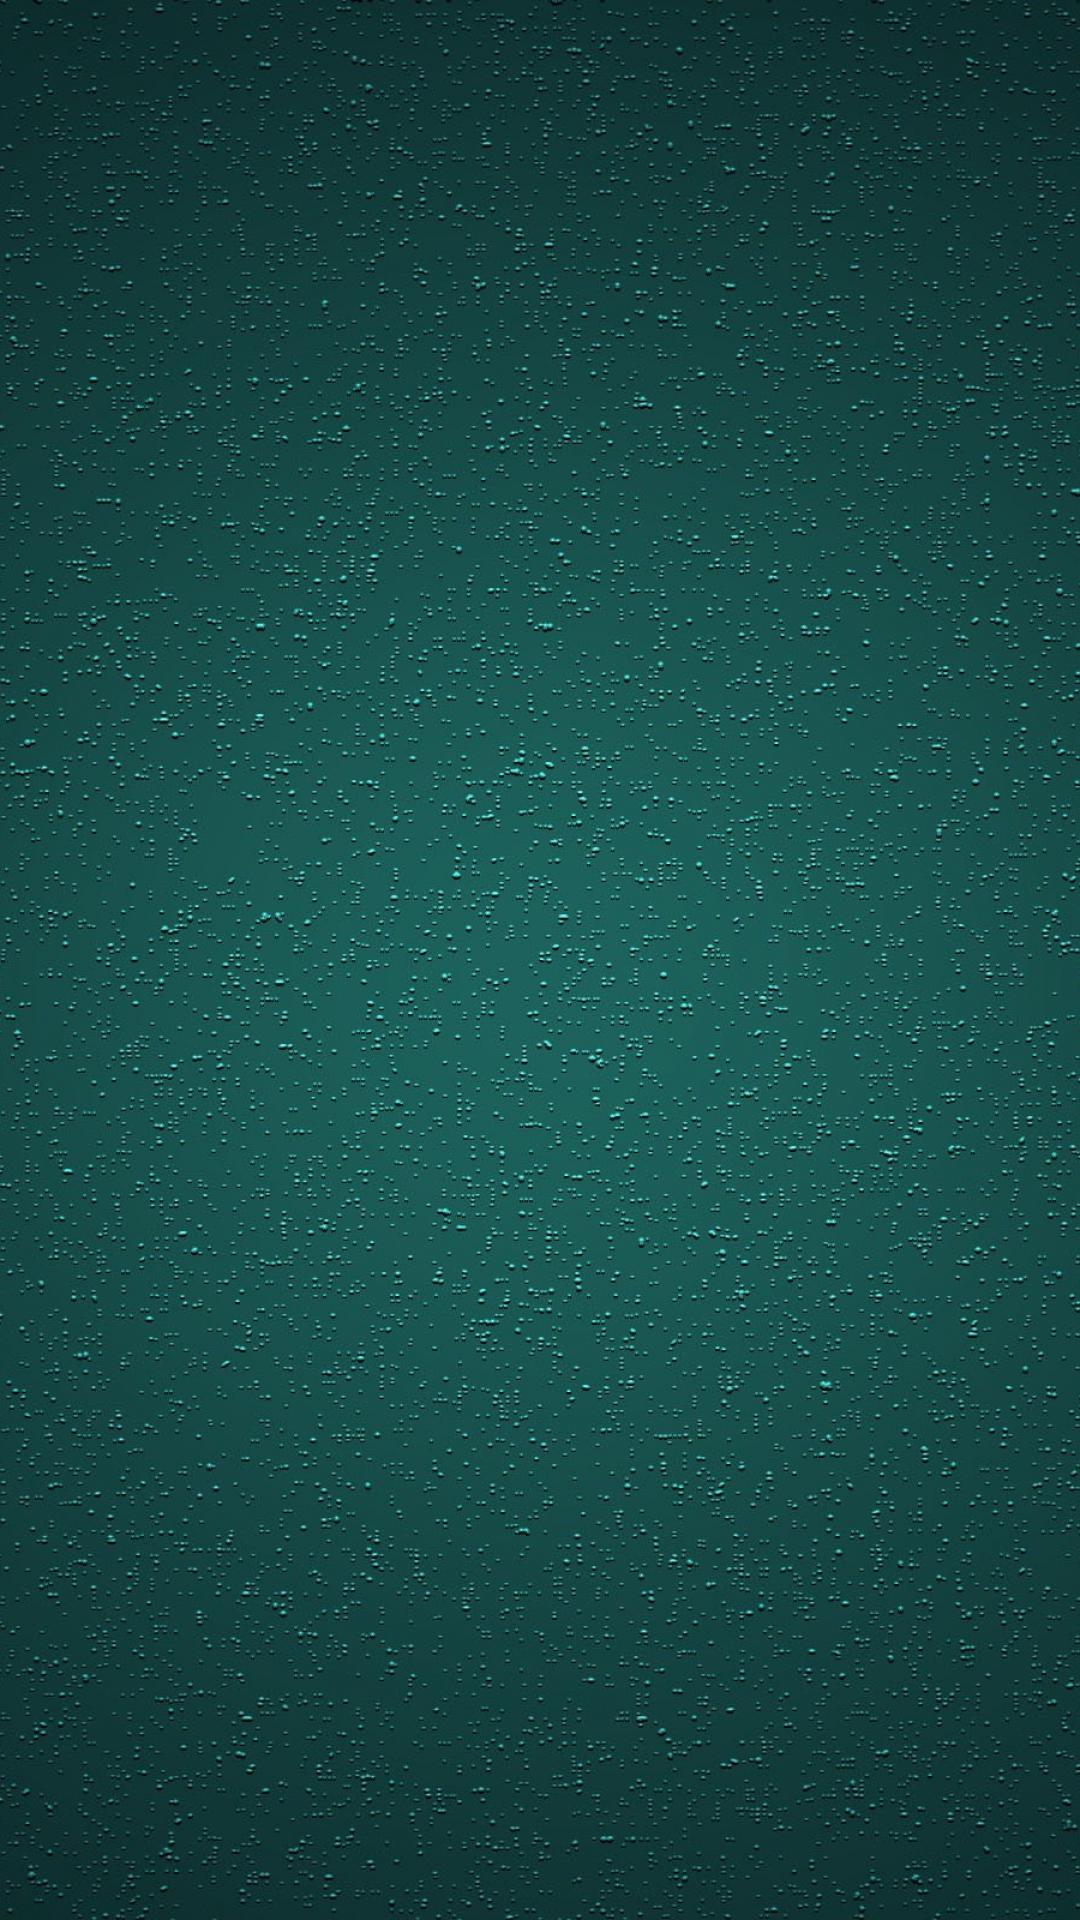 simple hd wallpaper for mobile,green,aqua,blue,turquoise,teal